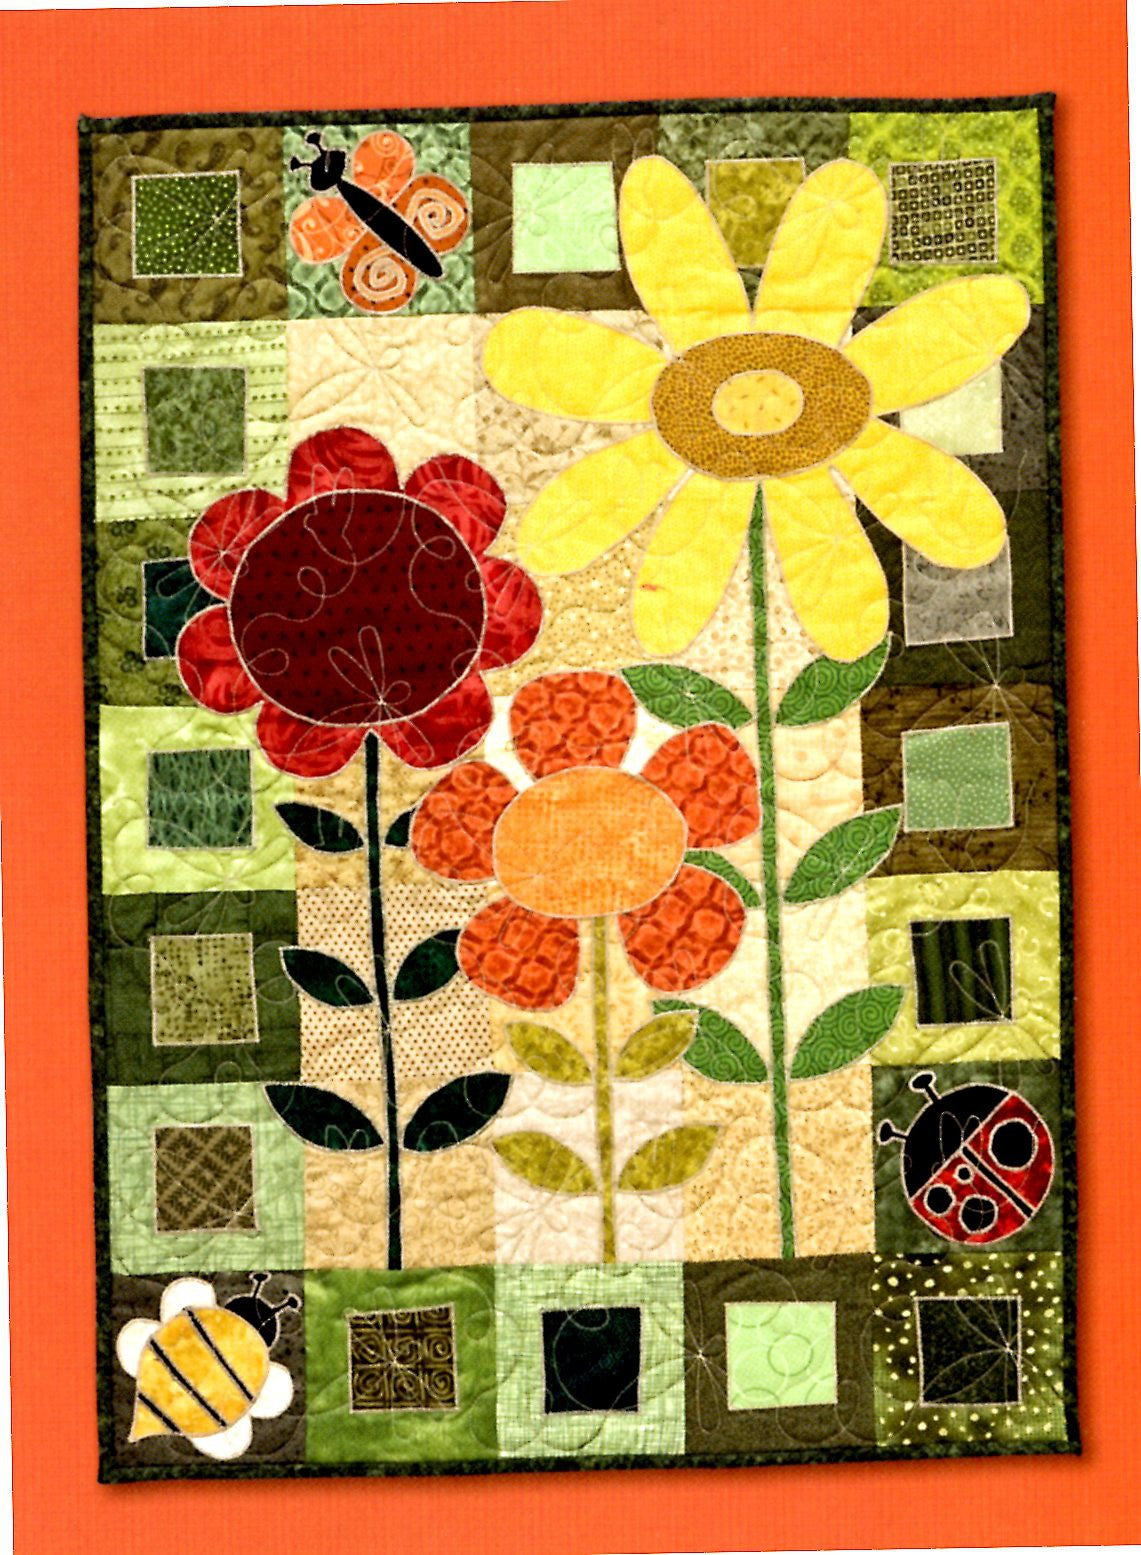 Kim Schaefers Calendar Quilts Pattern – Quilting Books Patterns and Notions